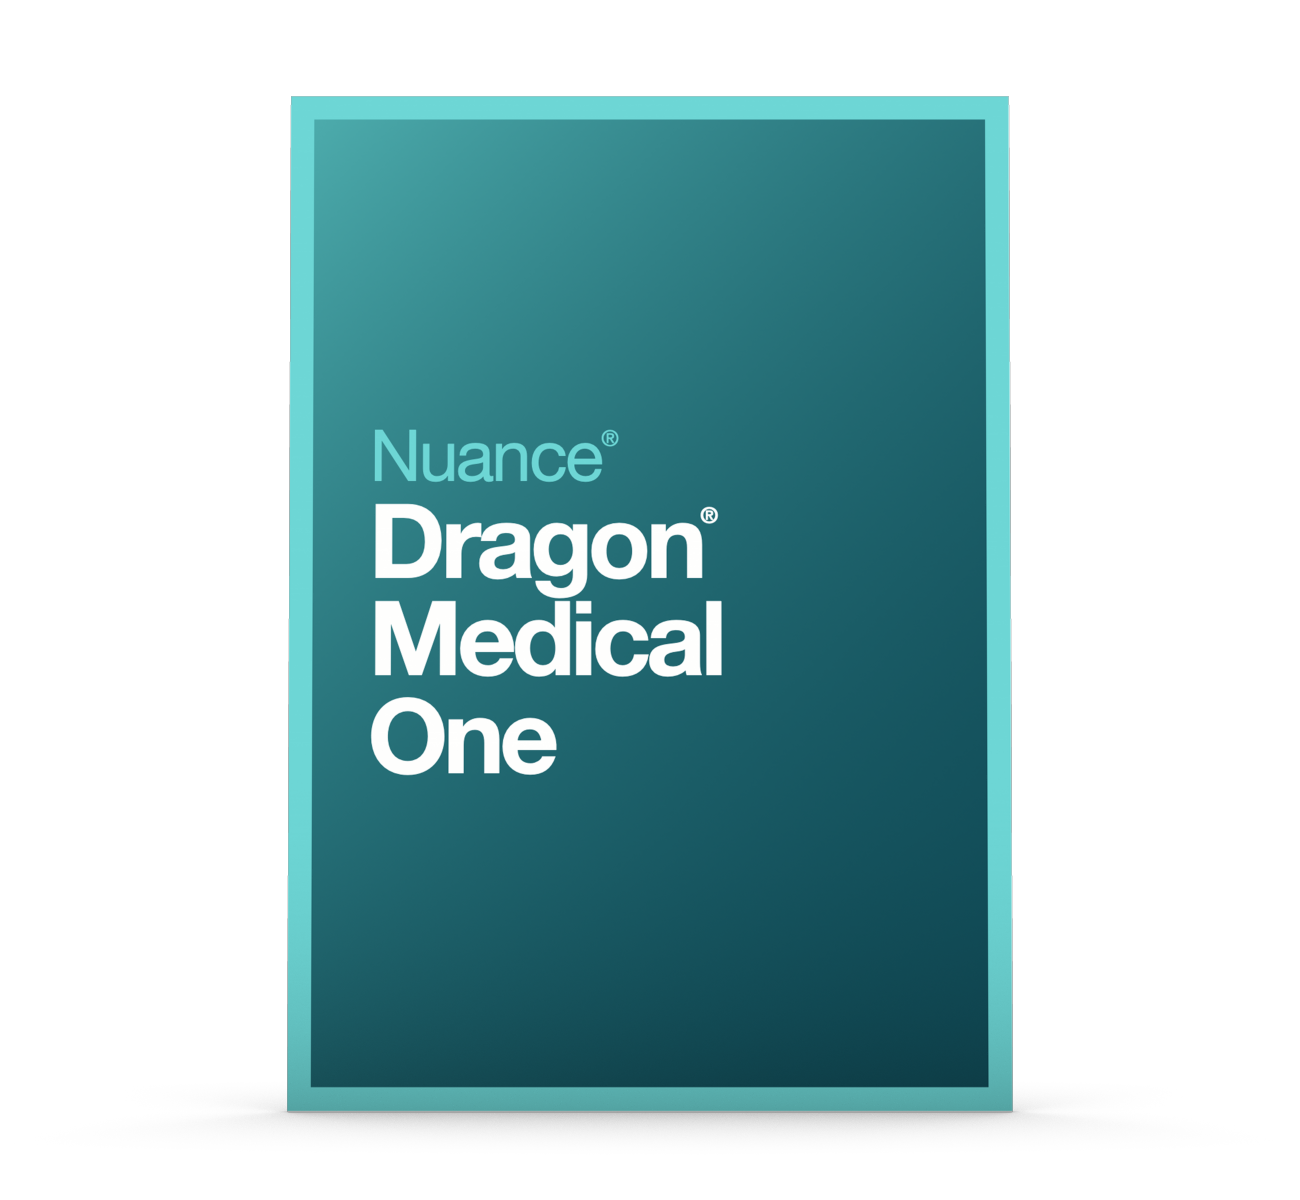 Nuance Dragon Medical One Speech Recognition